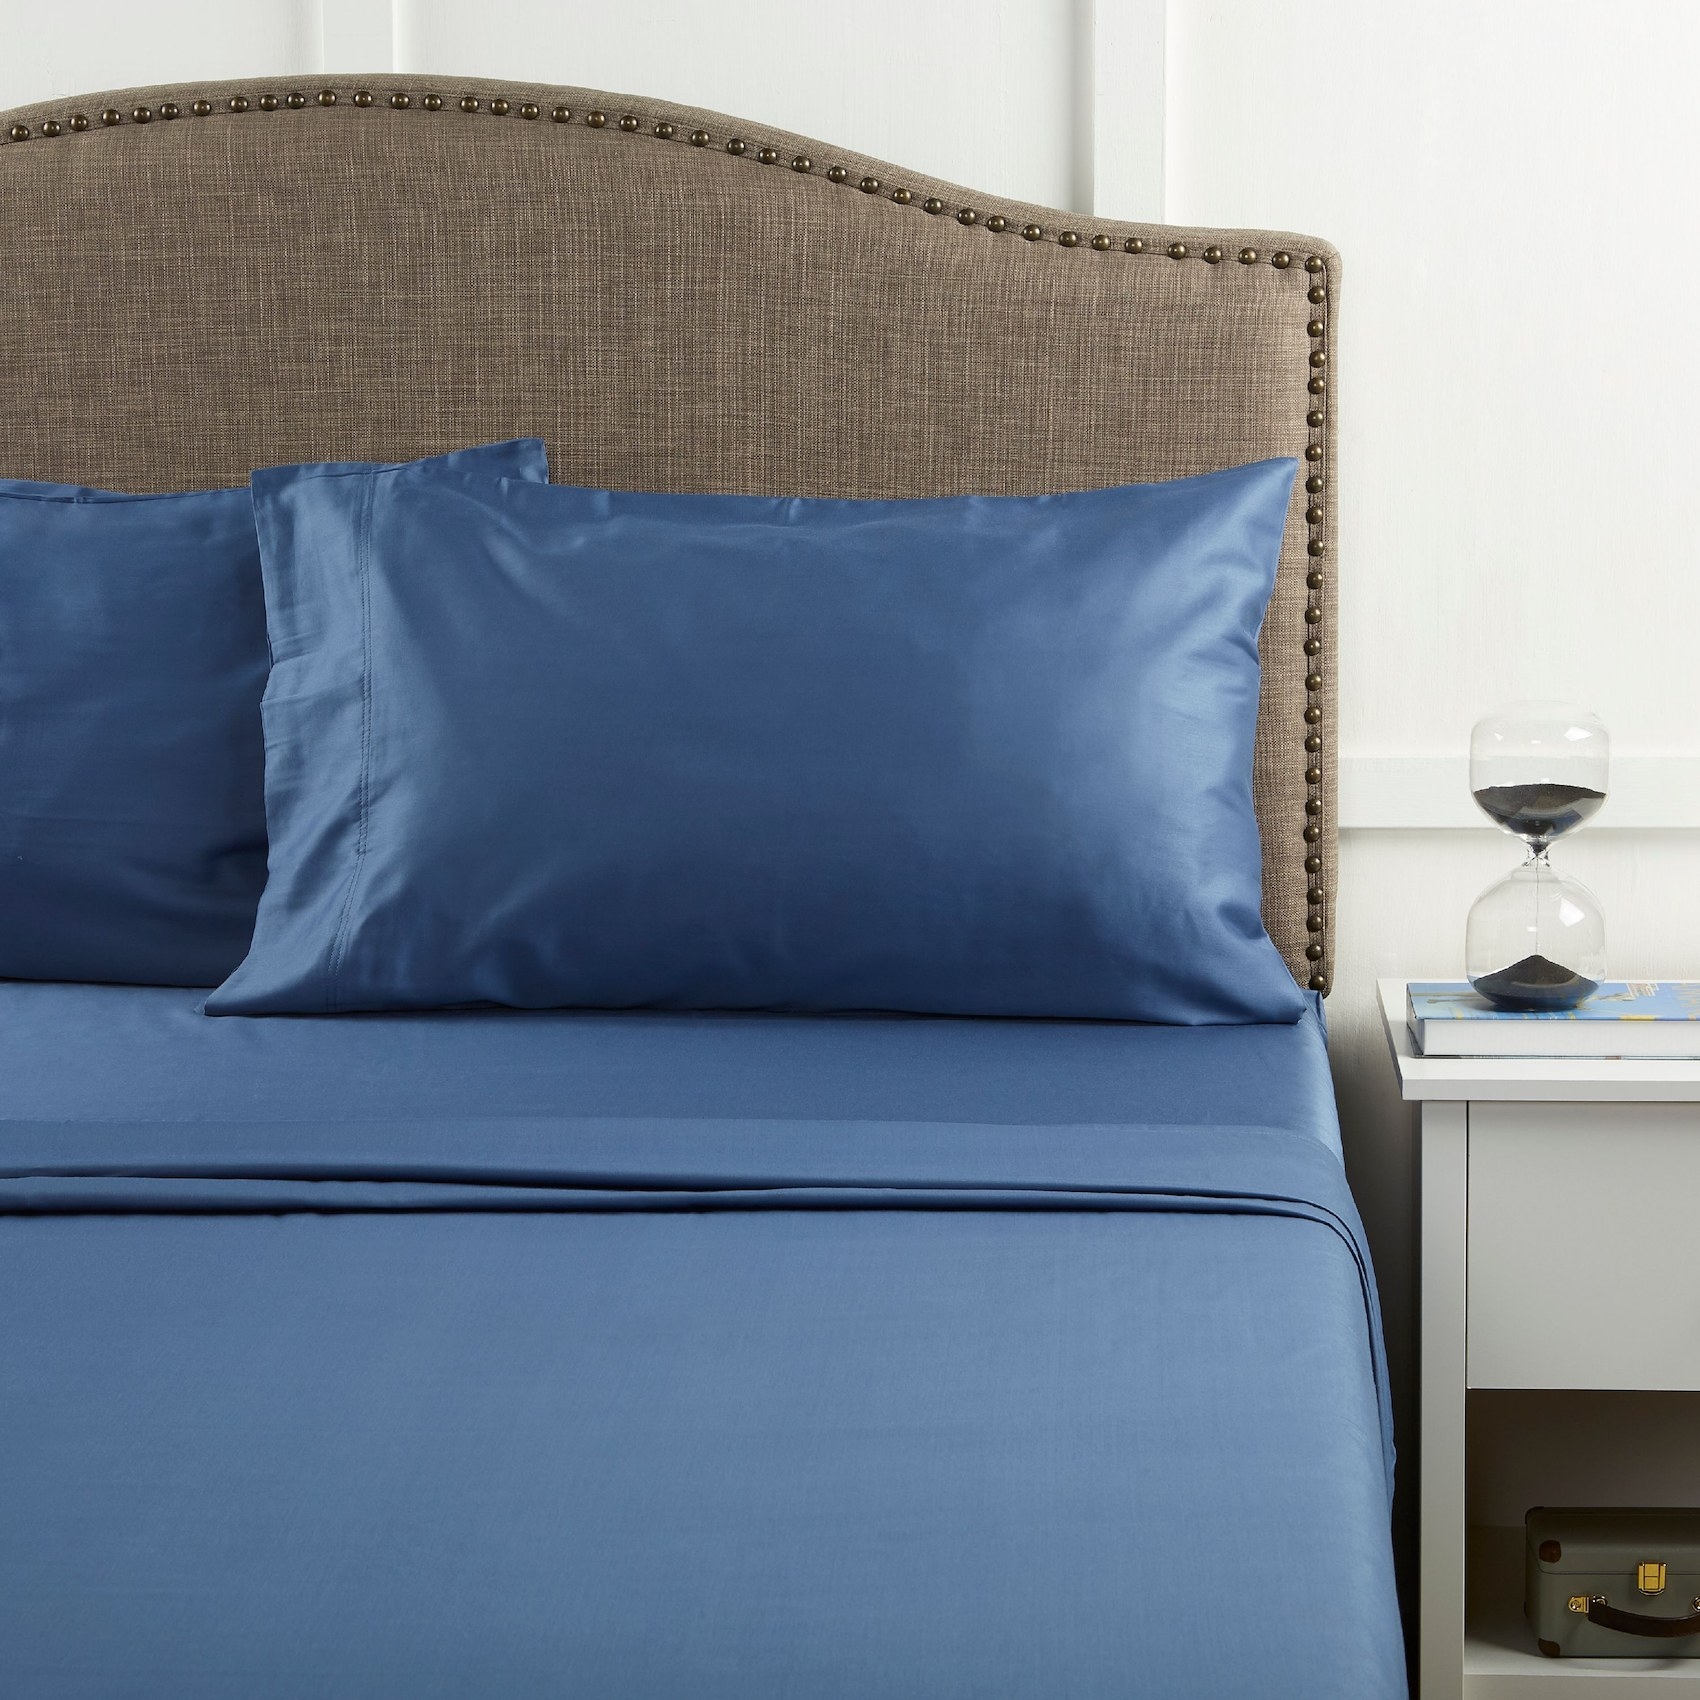 A set of the dark blue sheets with a satin-like finish on a bed